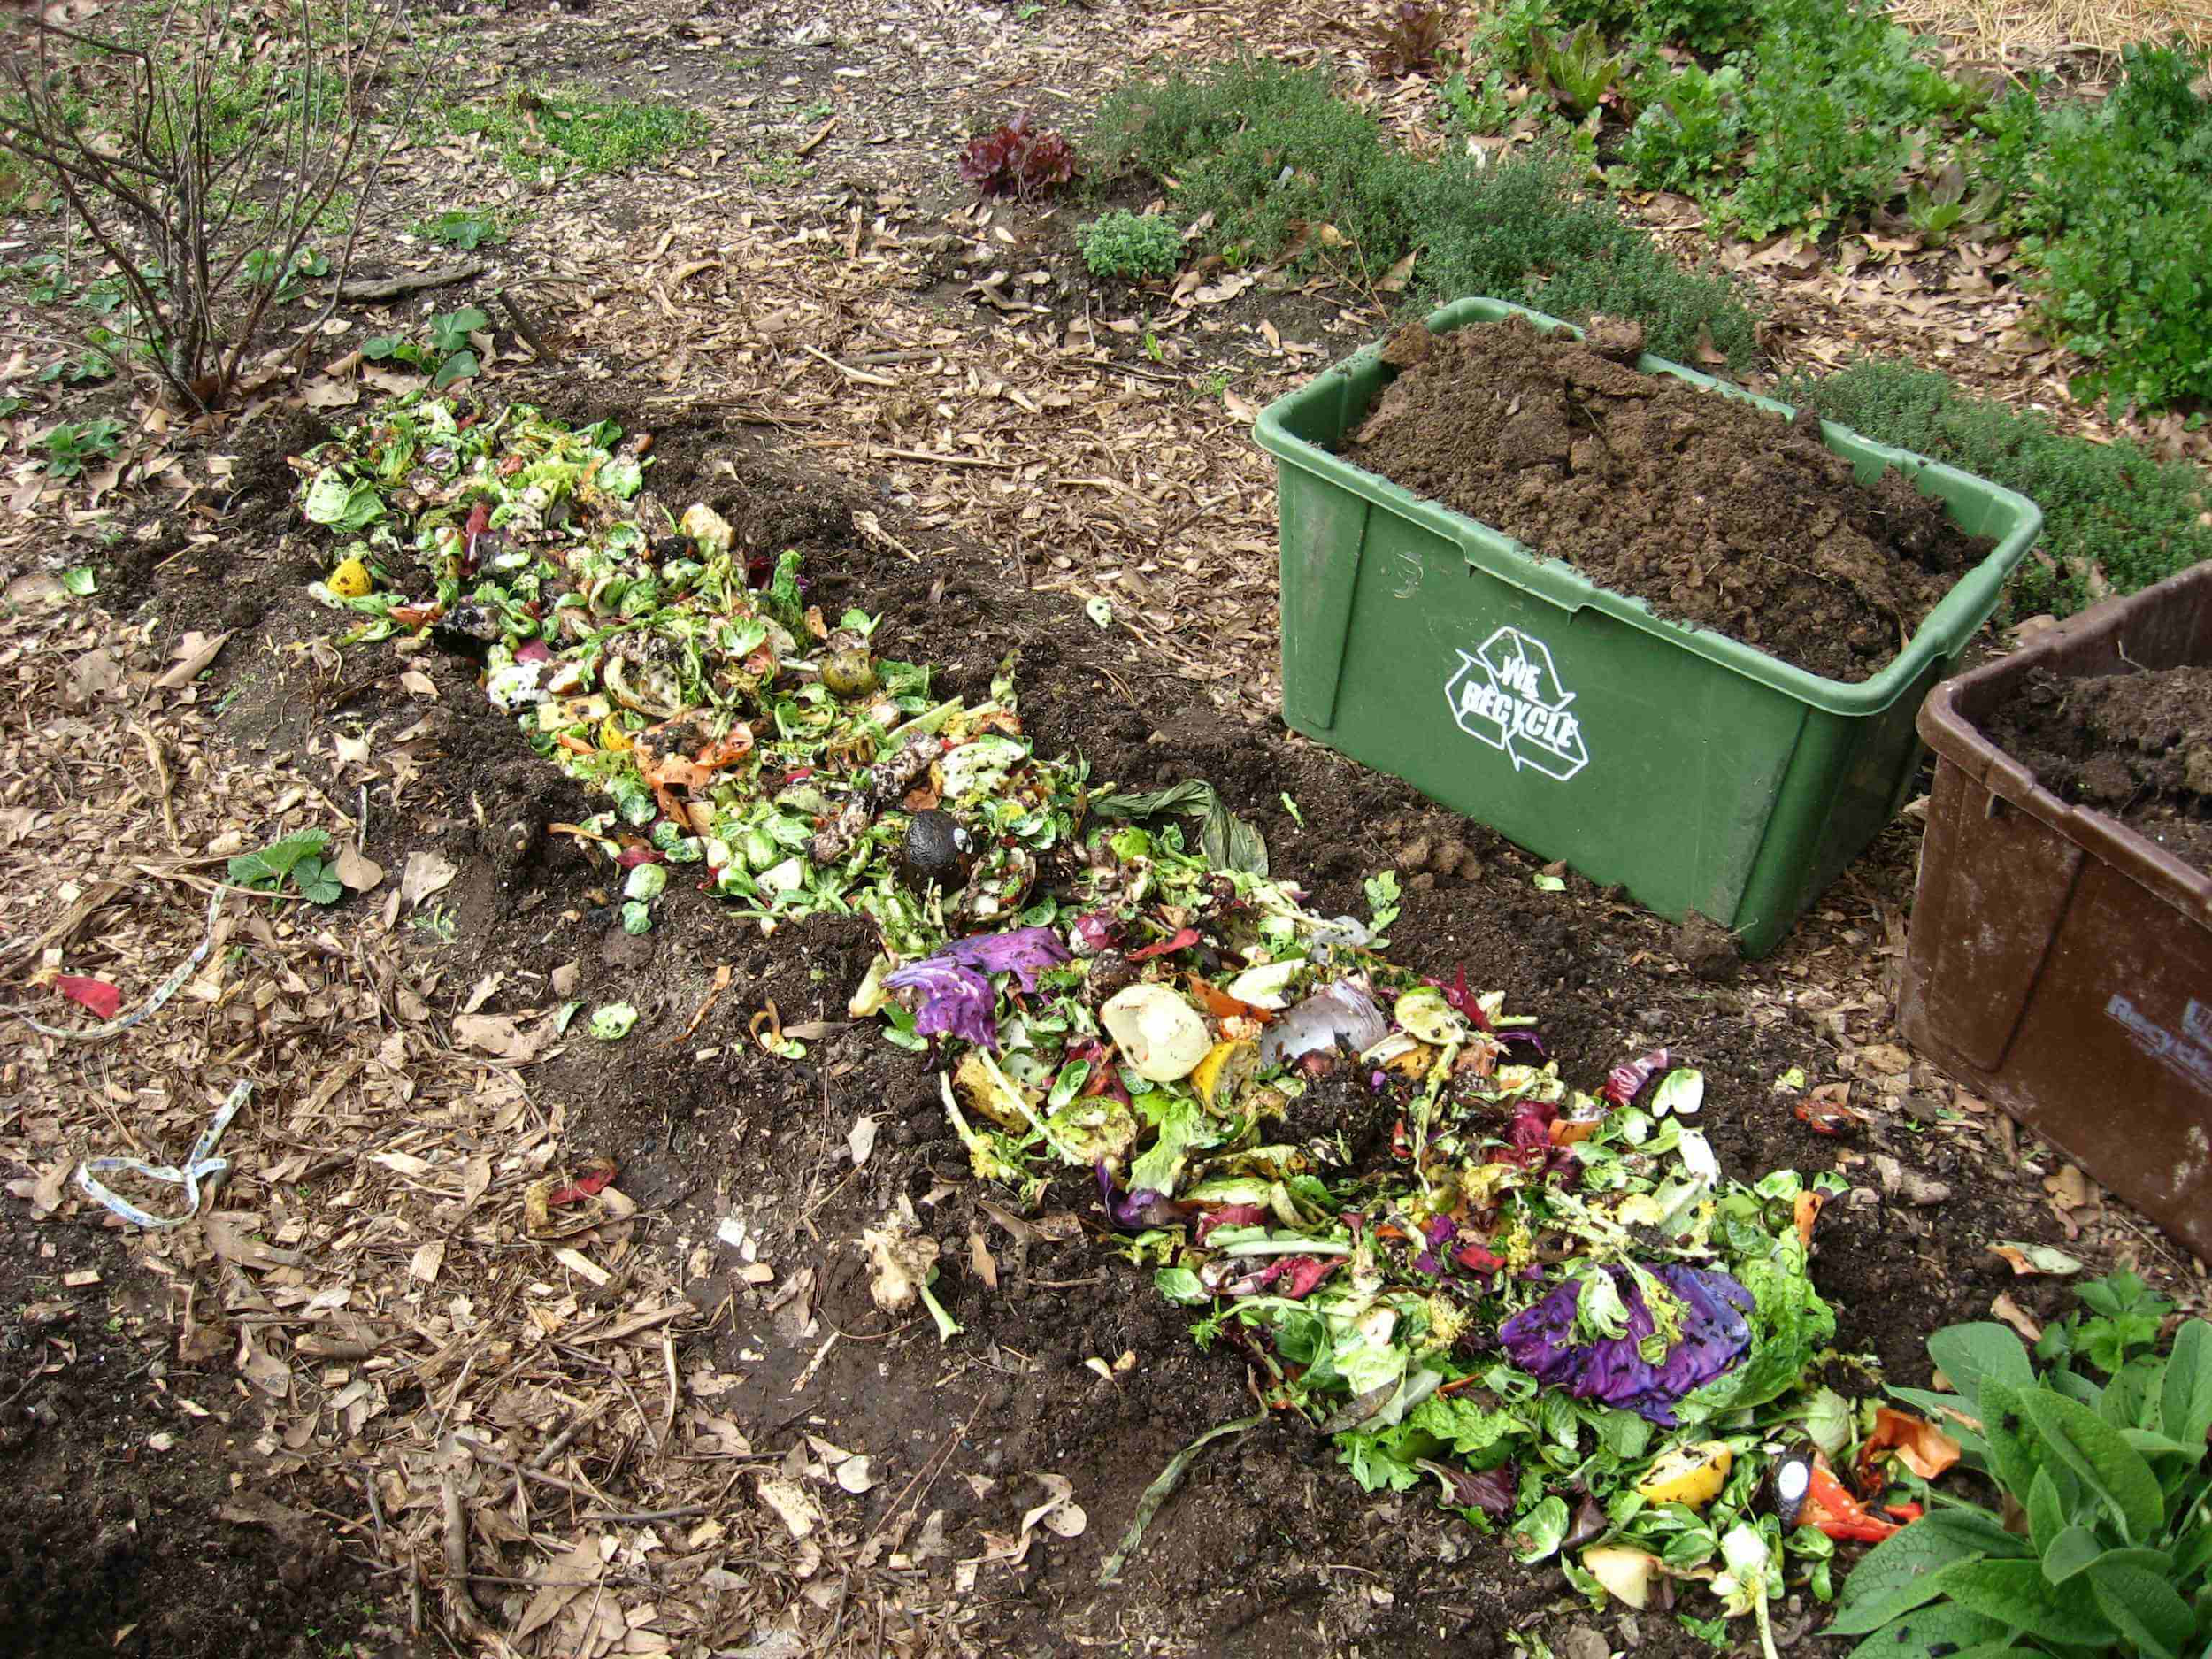 Composting 101: Definition, What to Compost & How to Start DIY Composting Guide for Beginners